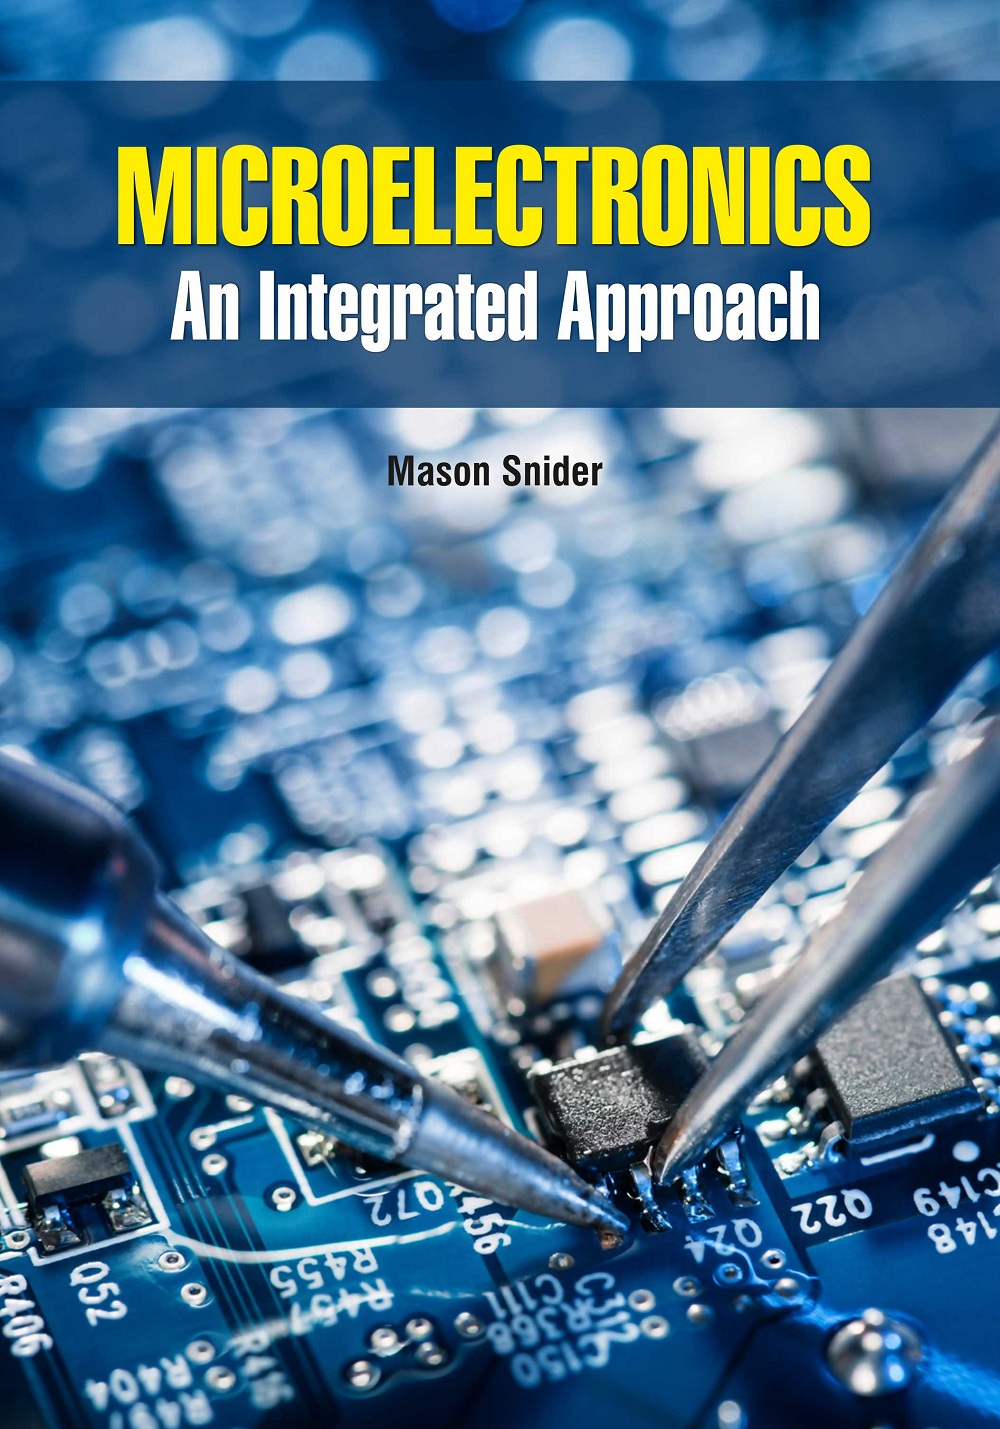 microelectronics an integrated approach pdf free download